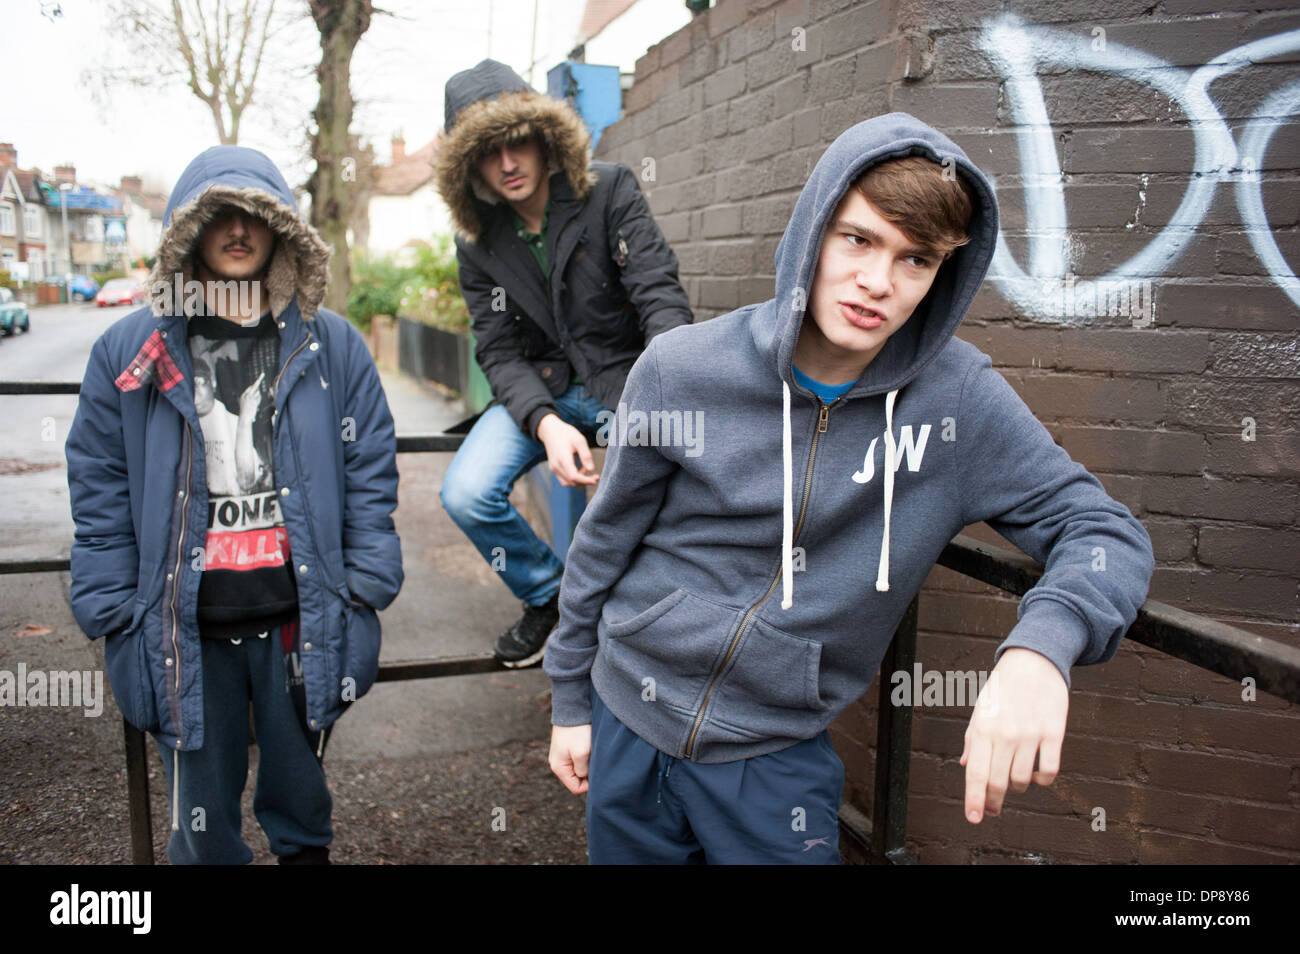 A group of teenage boys hanging around, posturing on a street corner looking intimidating and threatening. Stock Photo